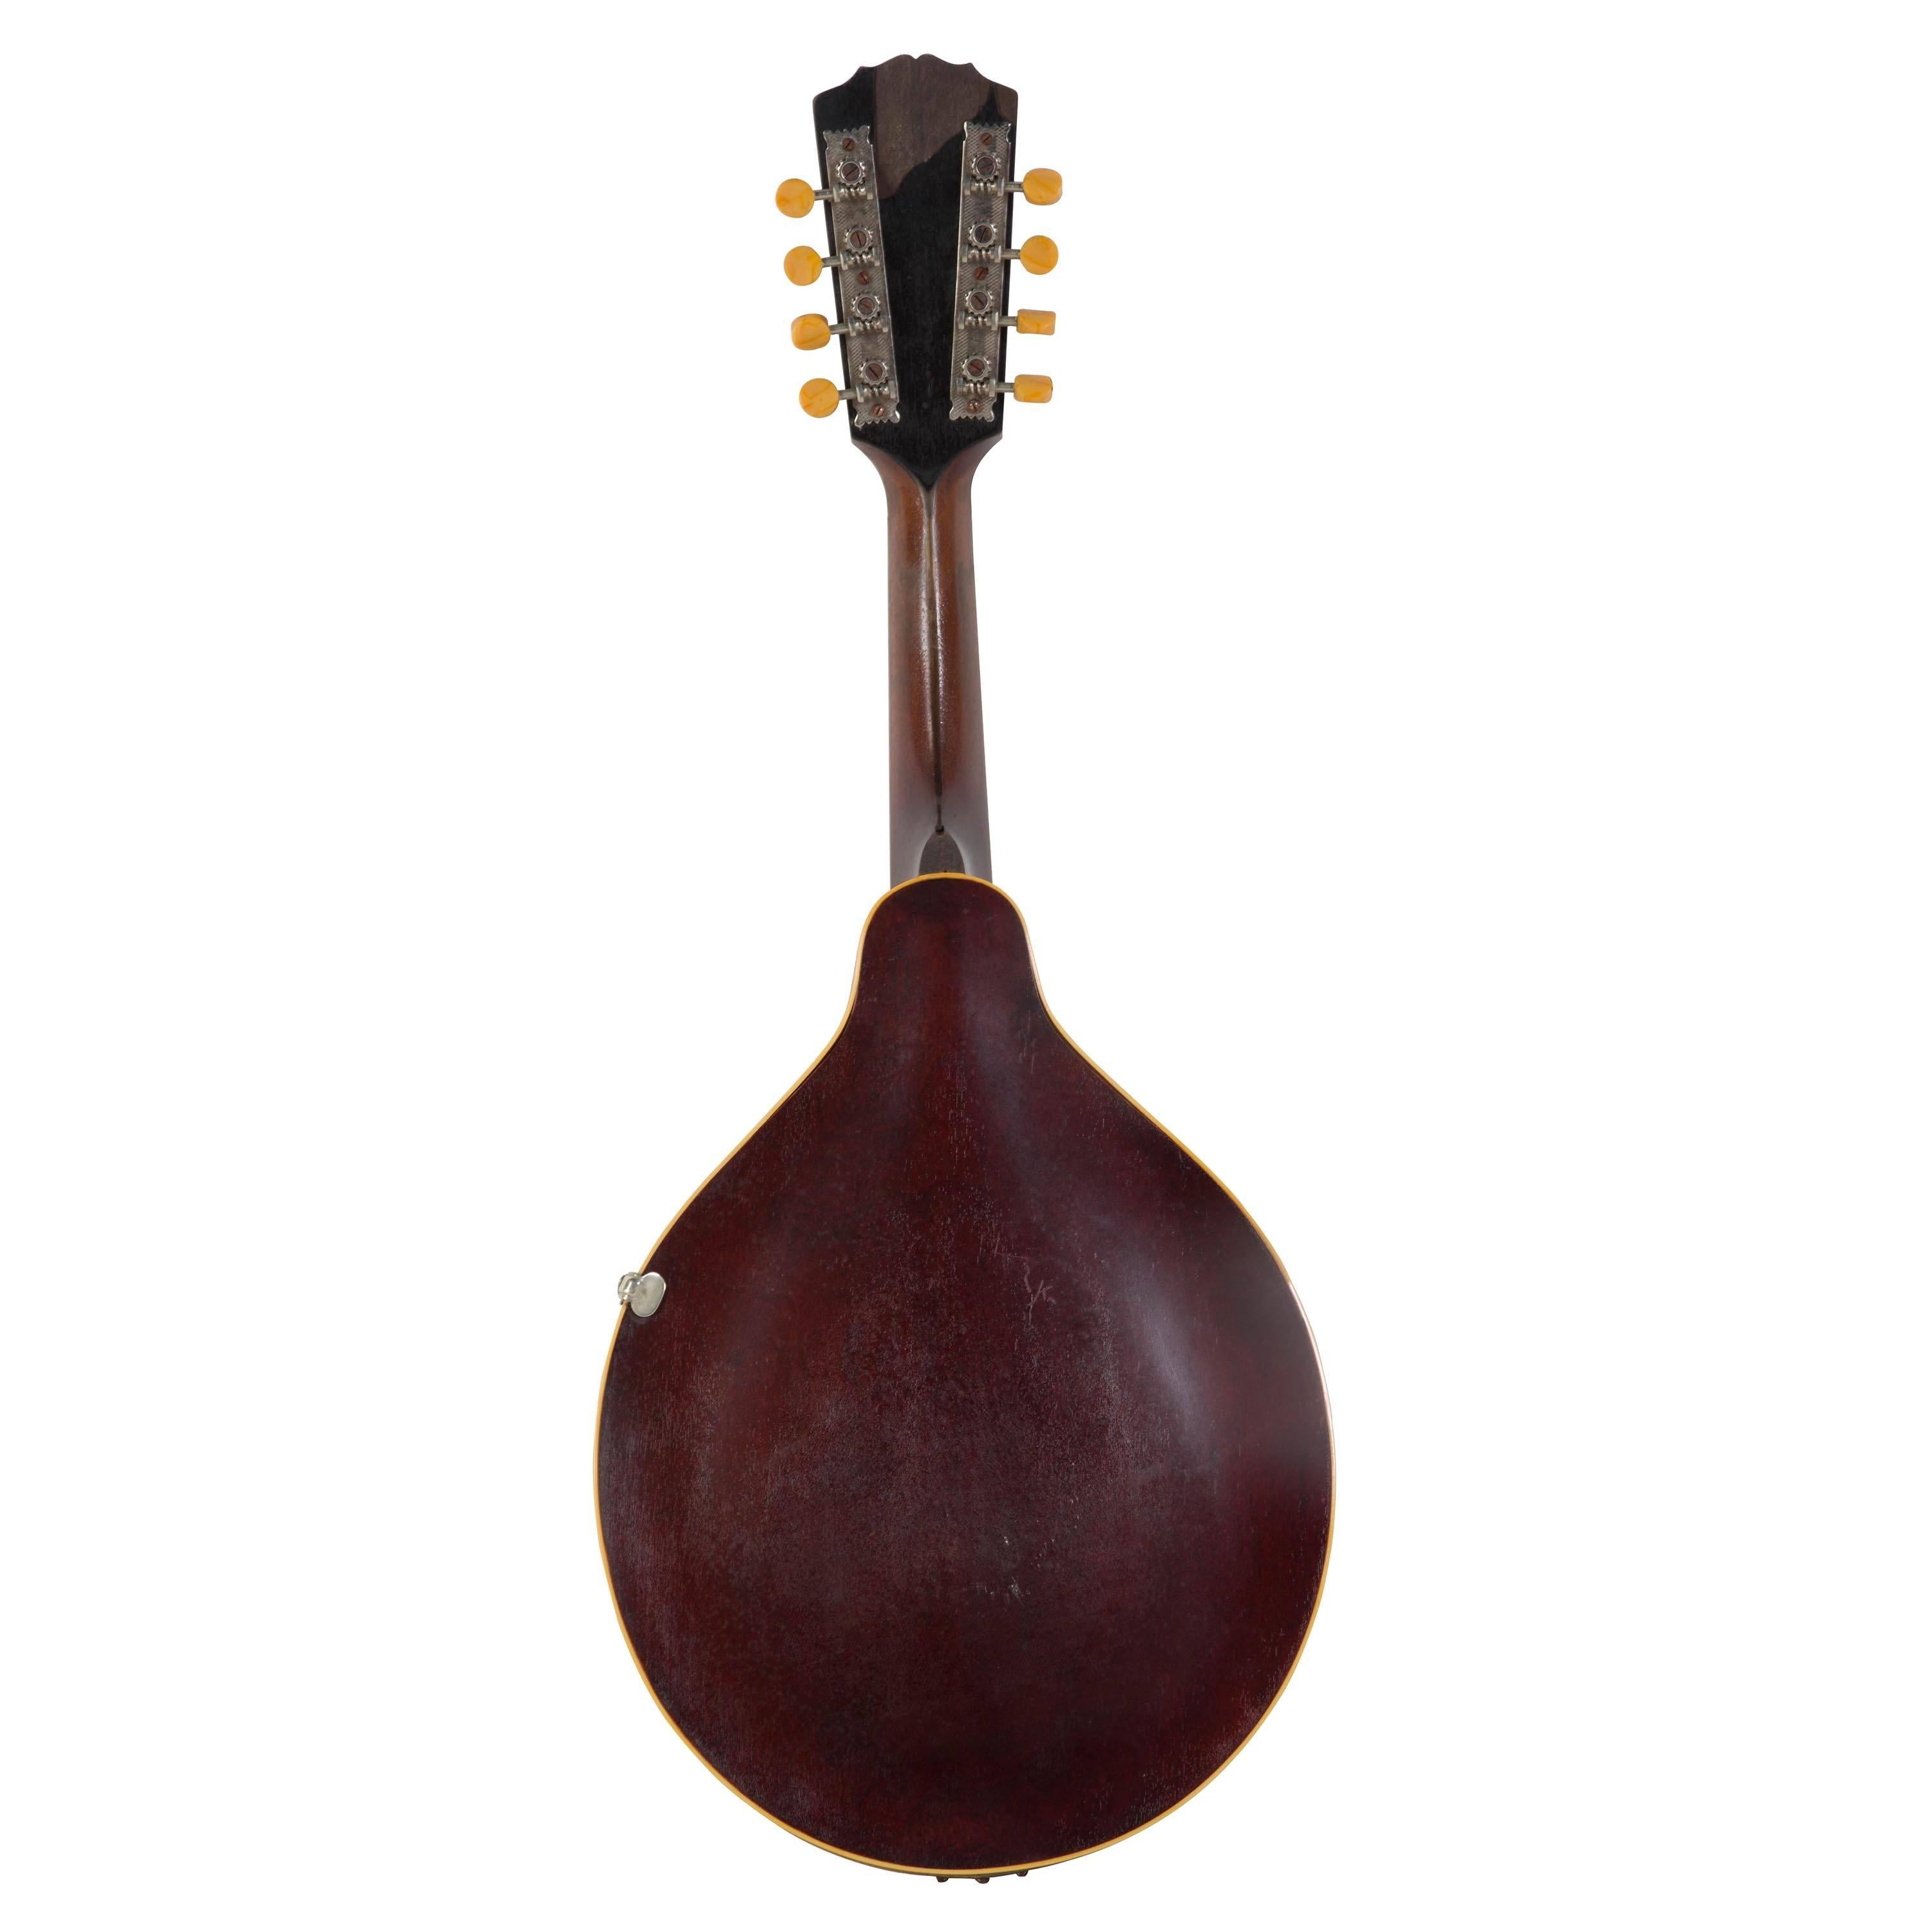 A 'The Gibson' A4 Mandolin, America 1919. The A4 was the top of the line of the Gibson A series Mandolins. These mandolins are renowned for their tone.
This example is in untouched original condition. There is a sliver of veneer lacking on the head